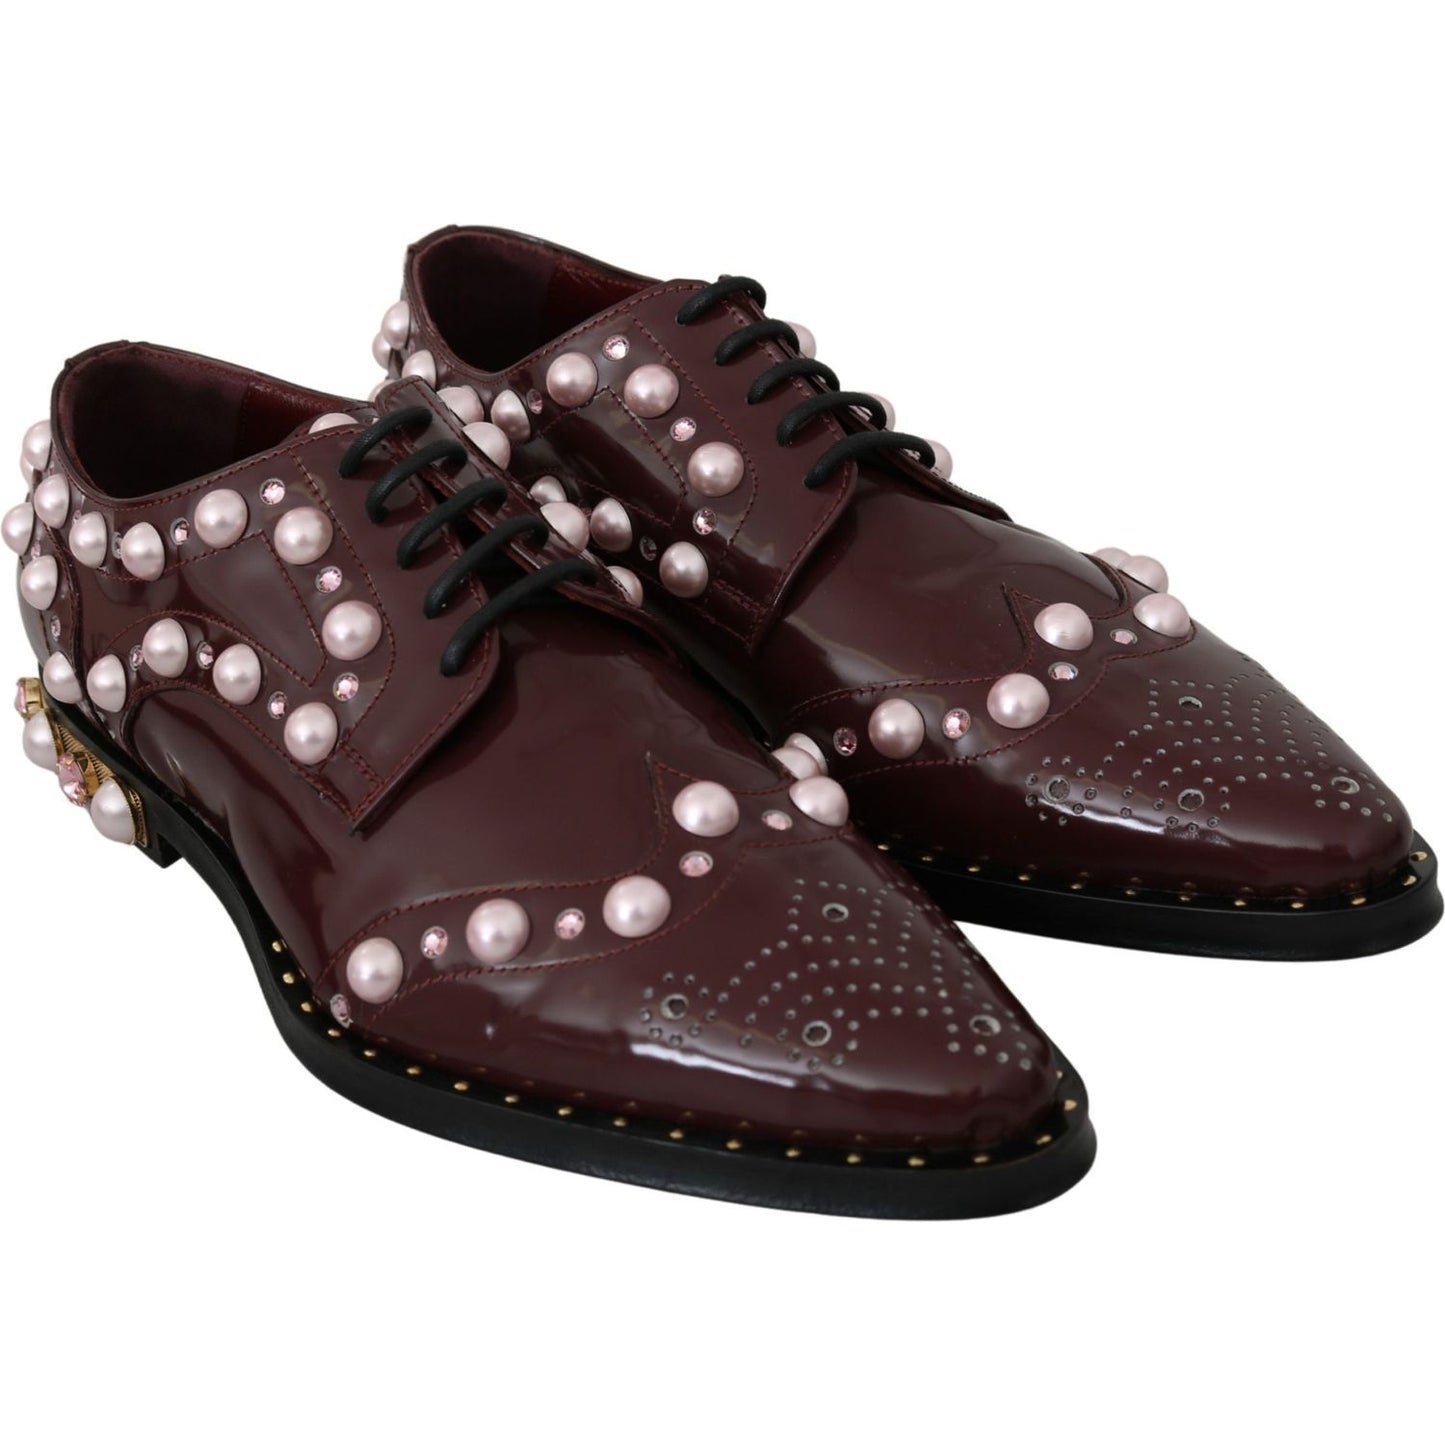 Dolce & Gabbana Elegant Bordeaux Lace-Up Flats with Pearls and Crystals bordeaux-leather-crystal-pearls-formal-shoes